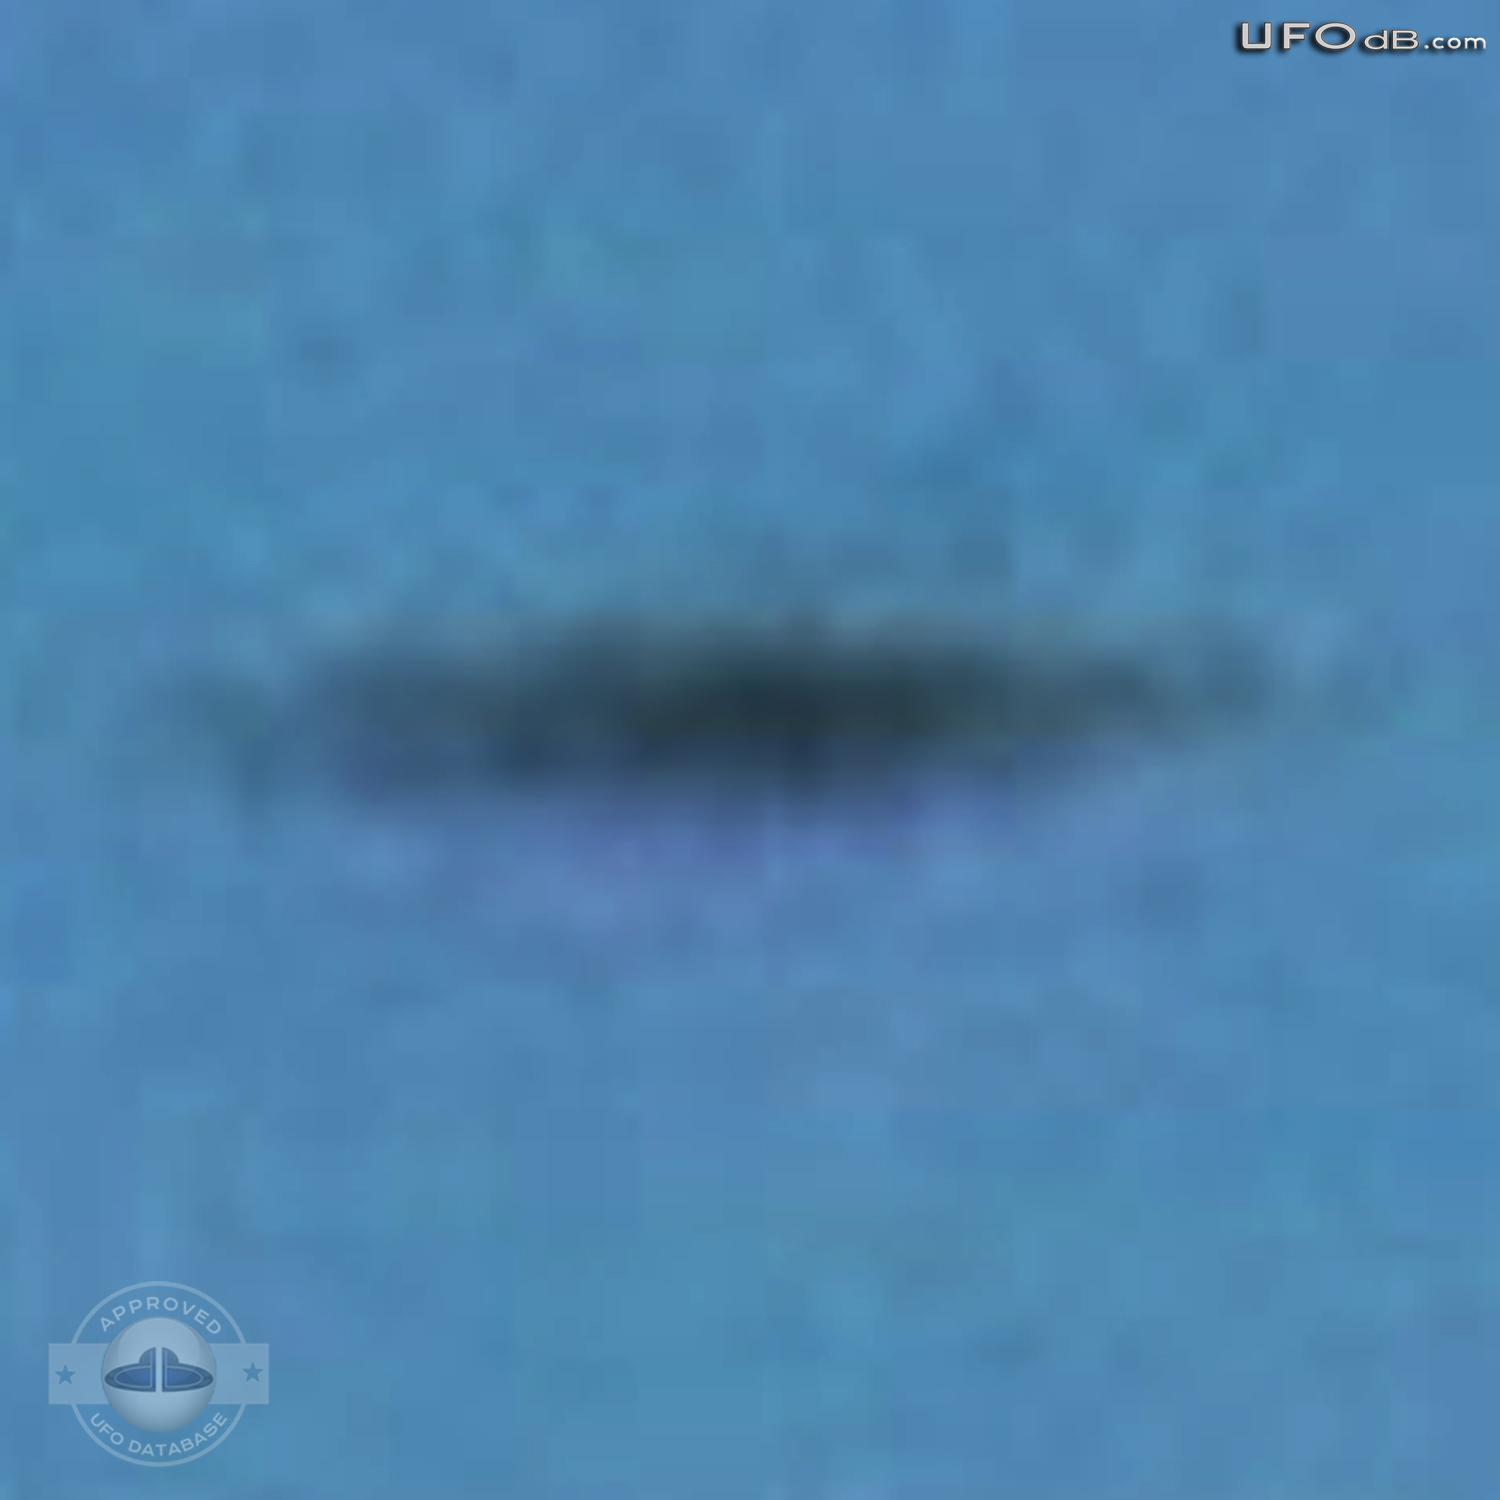 Lake Wosley Fisherman get a fast UFO on picture | Ontario, Canada 2011 UFO Picture #276-5